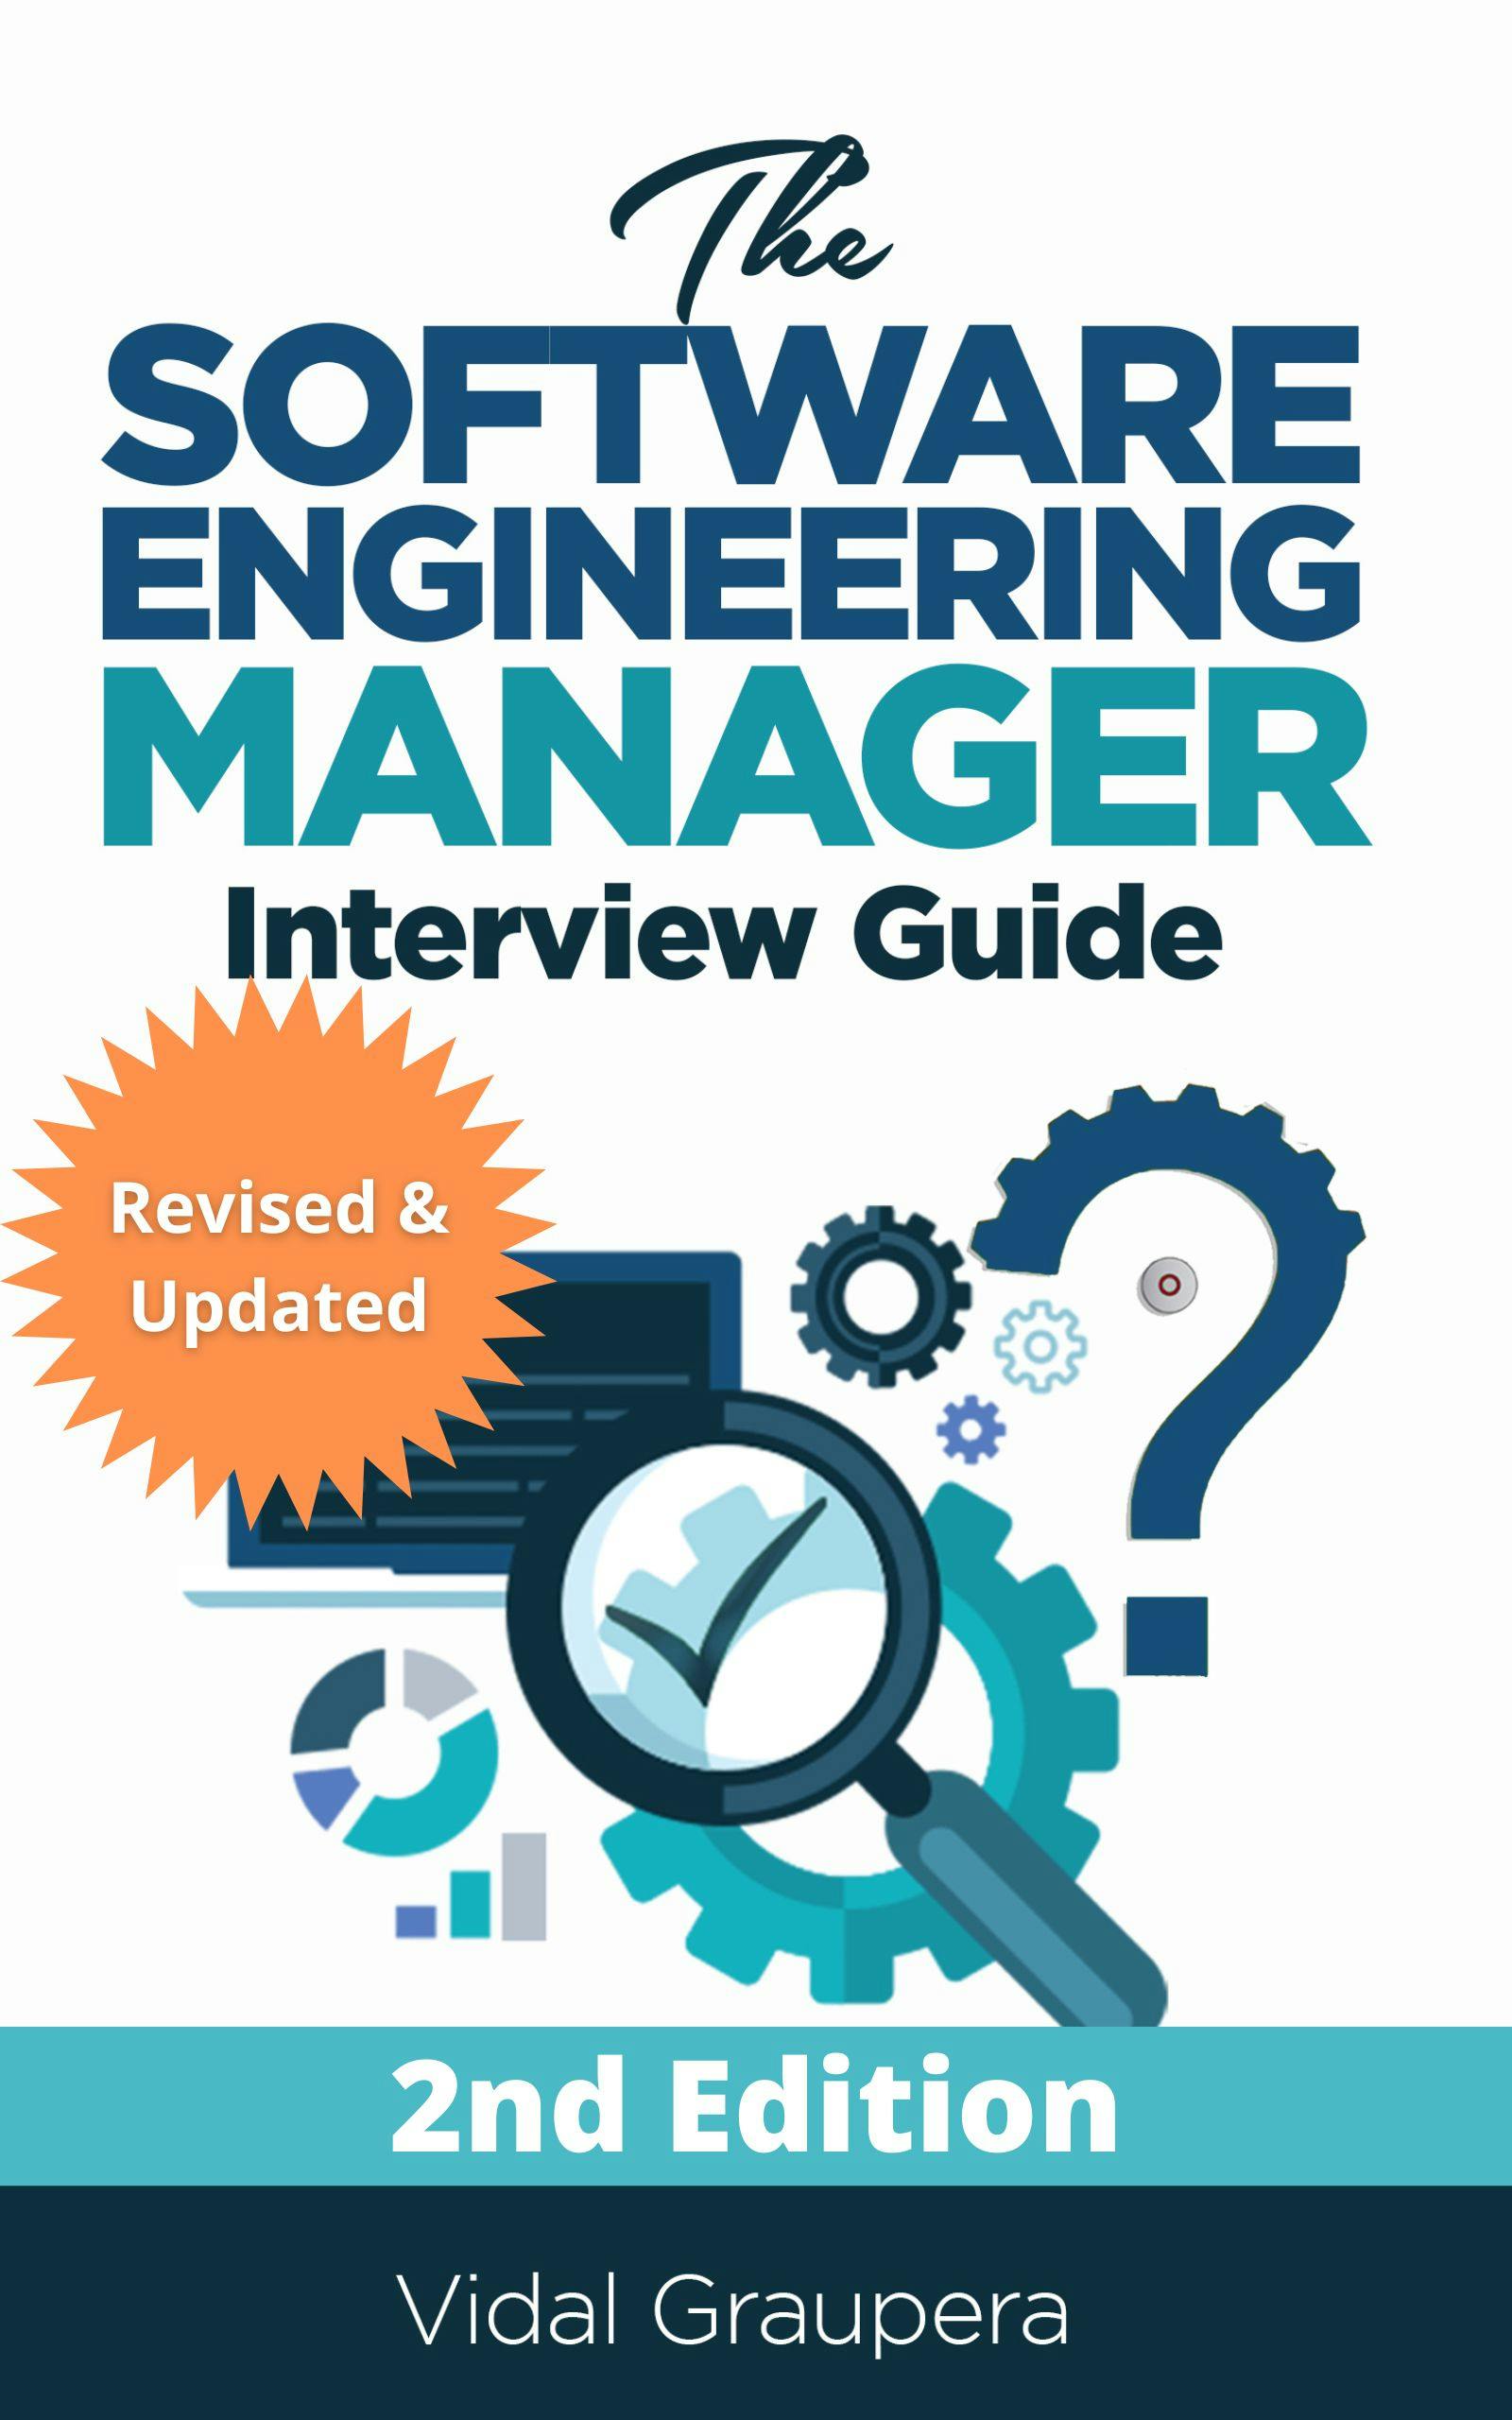 image for New Release: The Software Engineering Manager Interview Guide, 2nd Edition